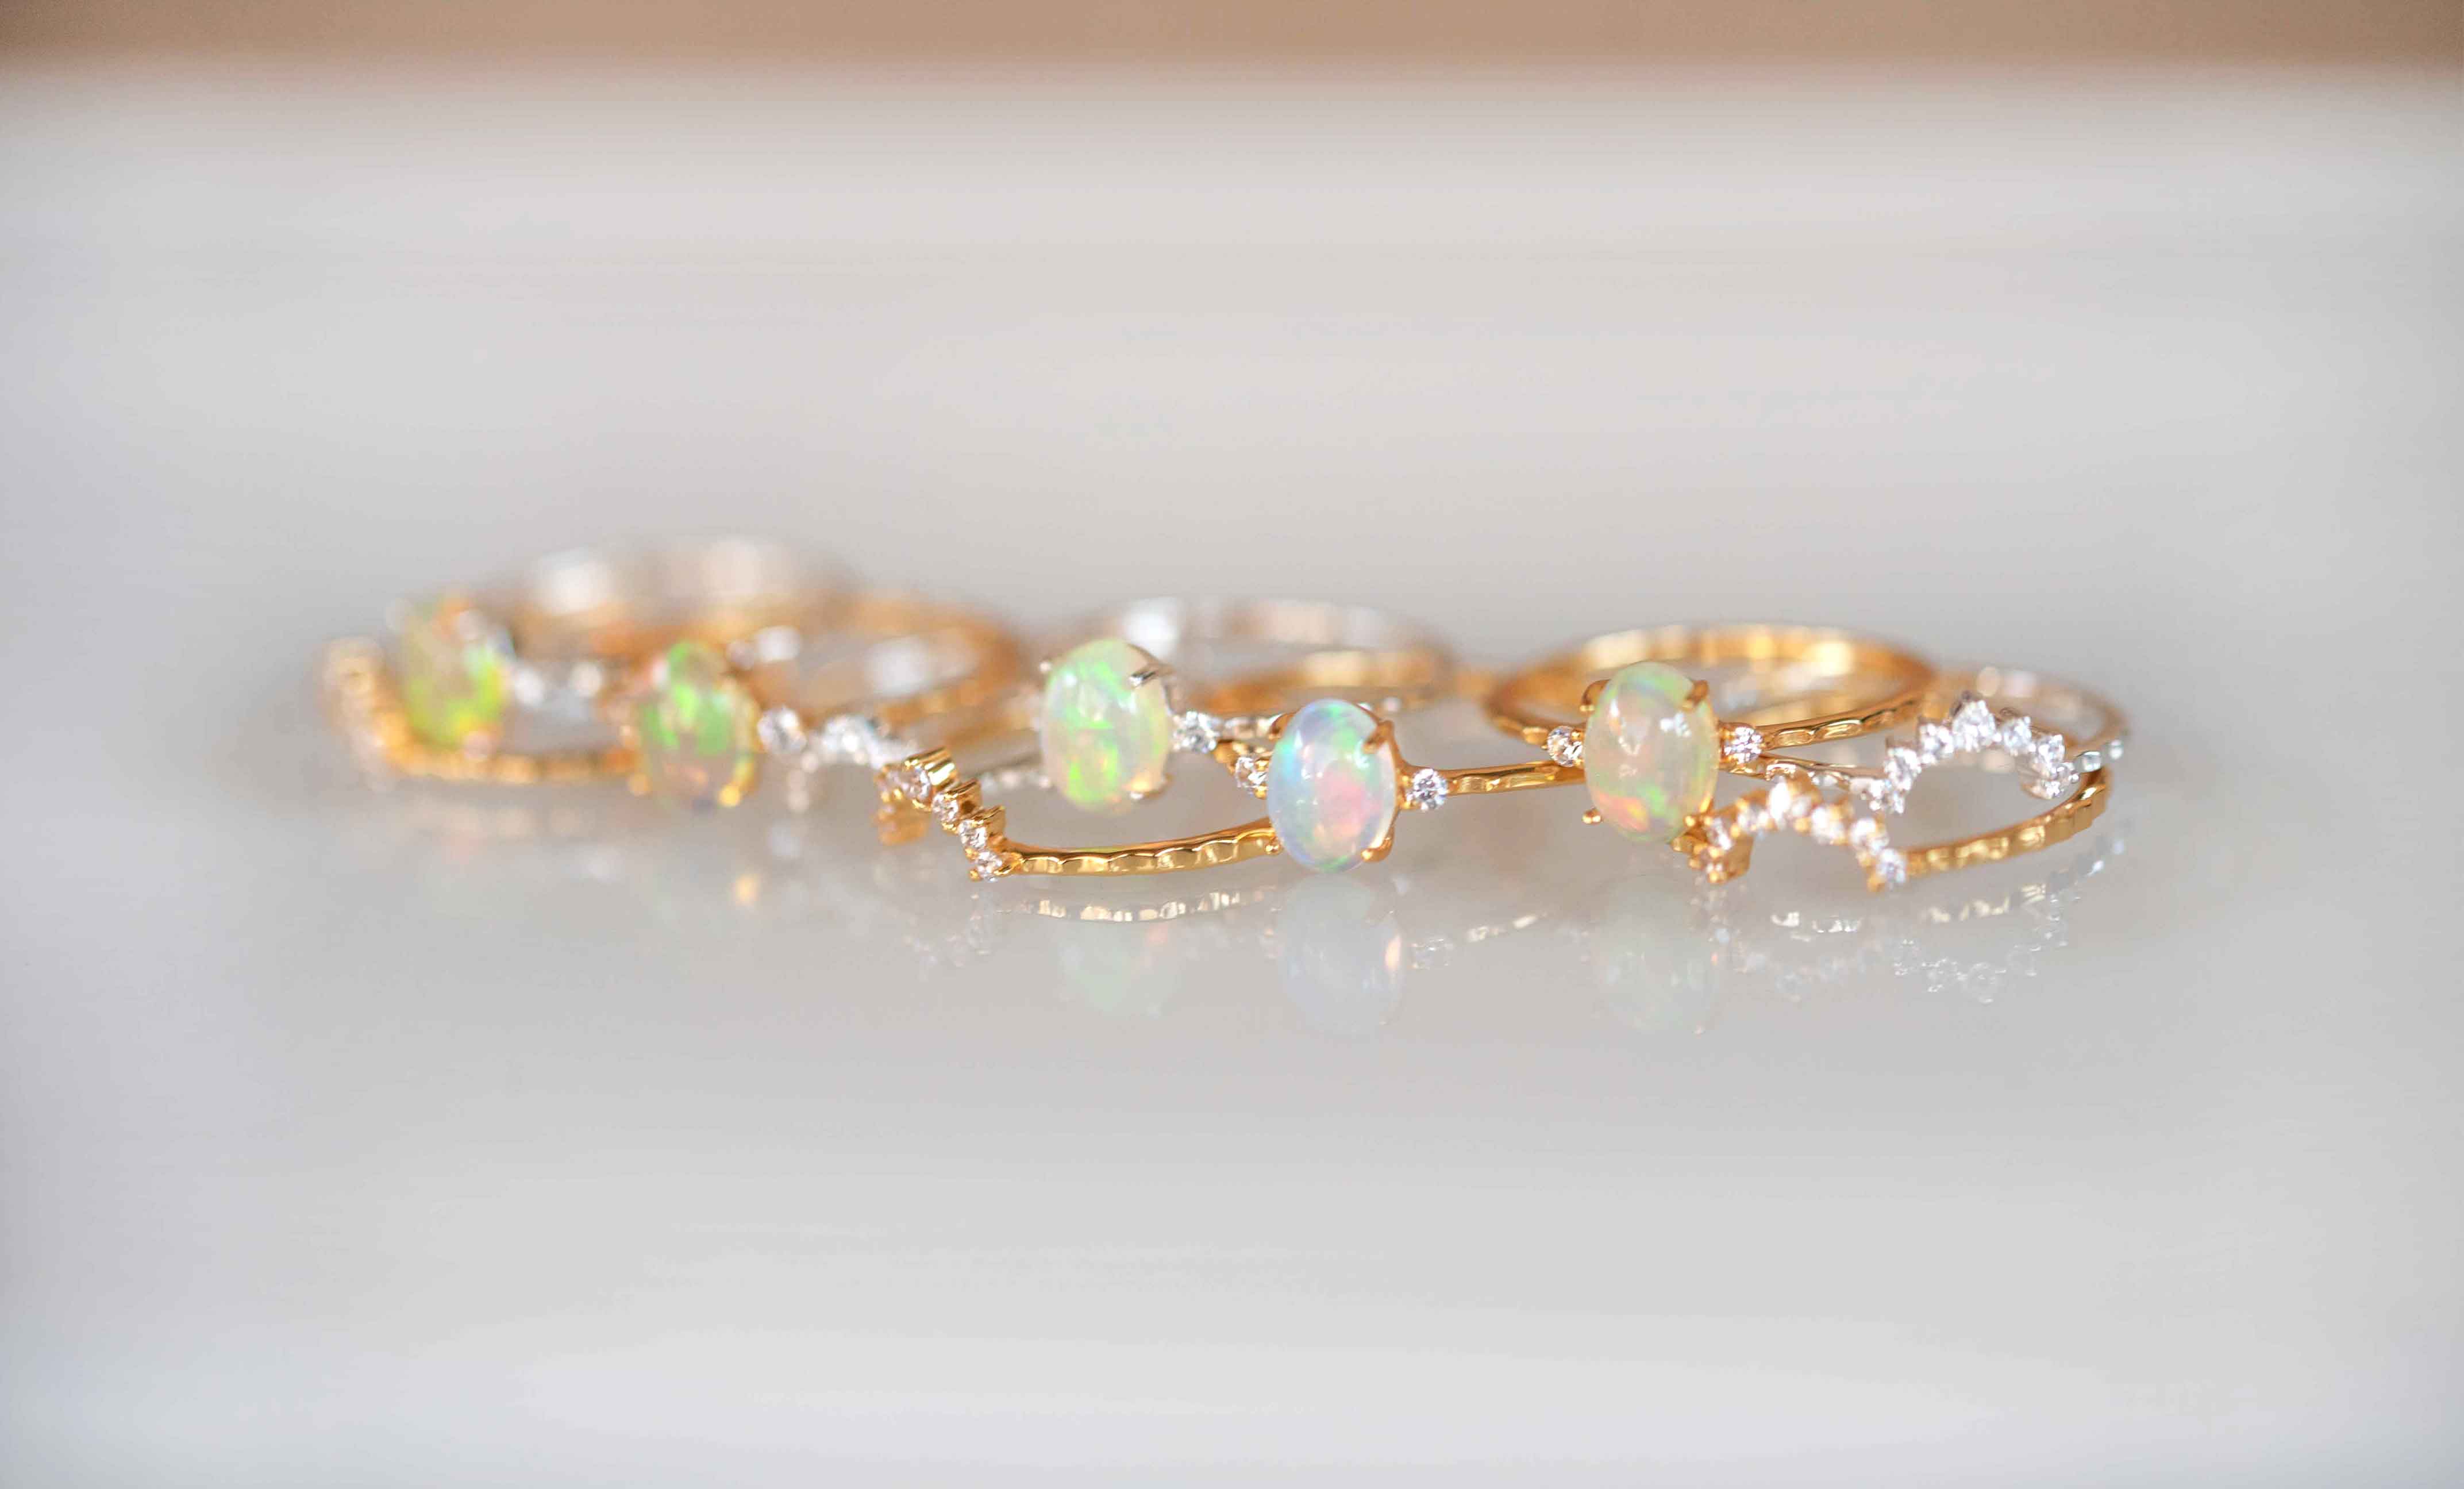 HOW TO CARE FOR ETHIOPIAN OPAL JEWELRY